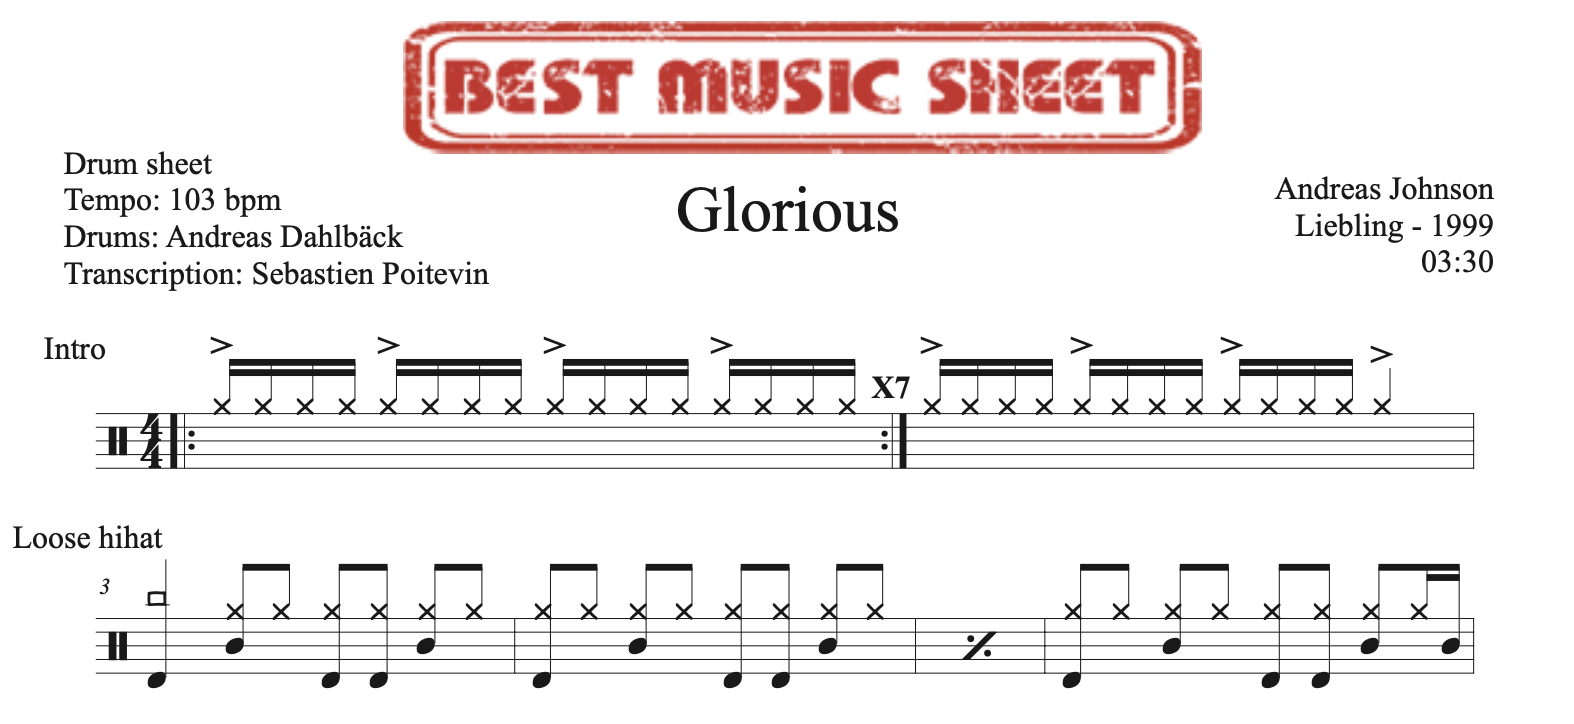 Sample drum sheet of Glorious by Andreas Johnson